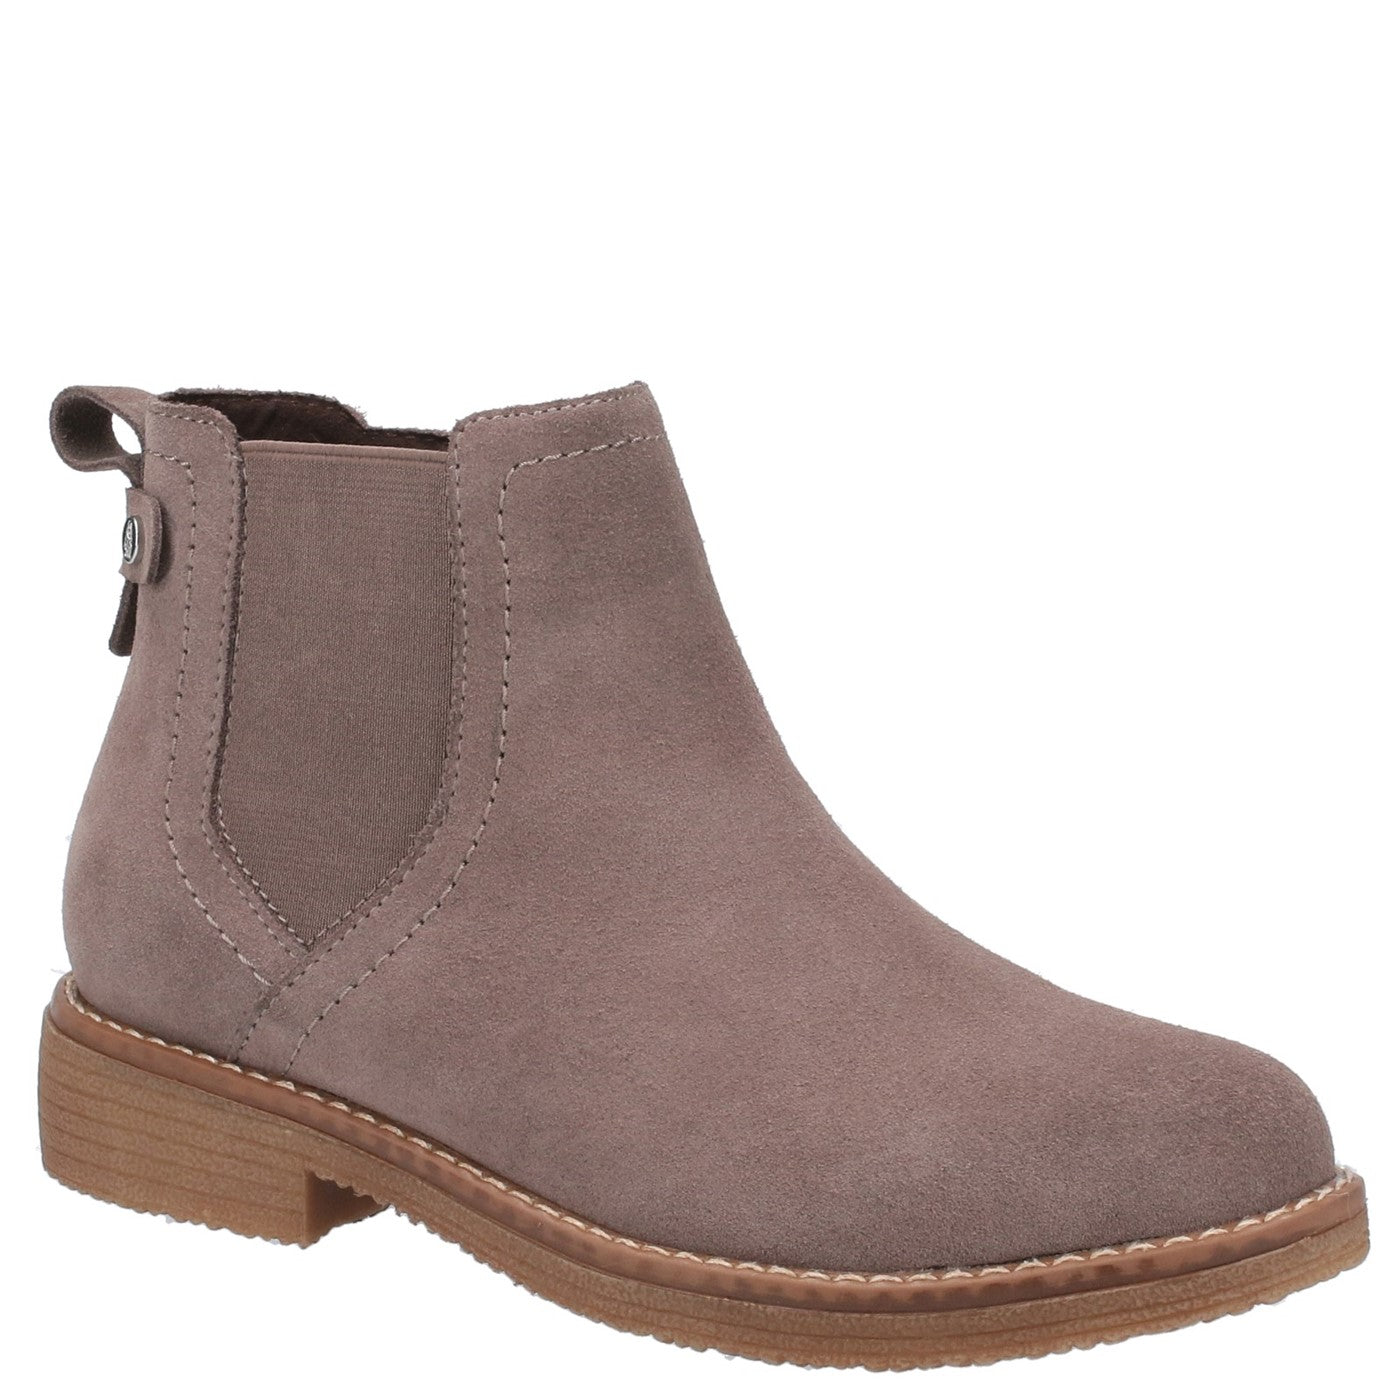 Women's Hush Puppies Maddy Ladies Ankle Boots